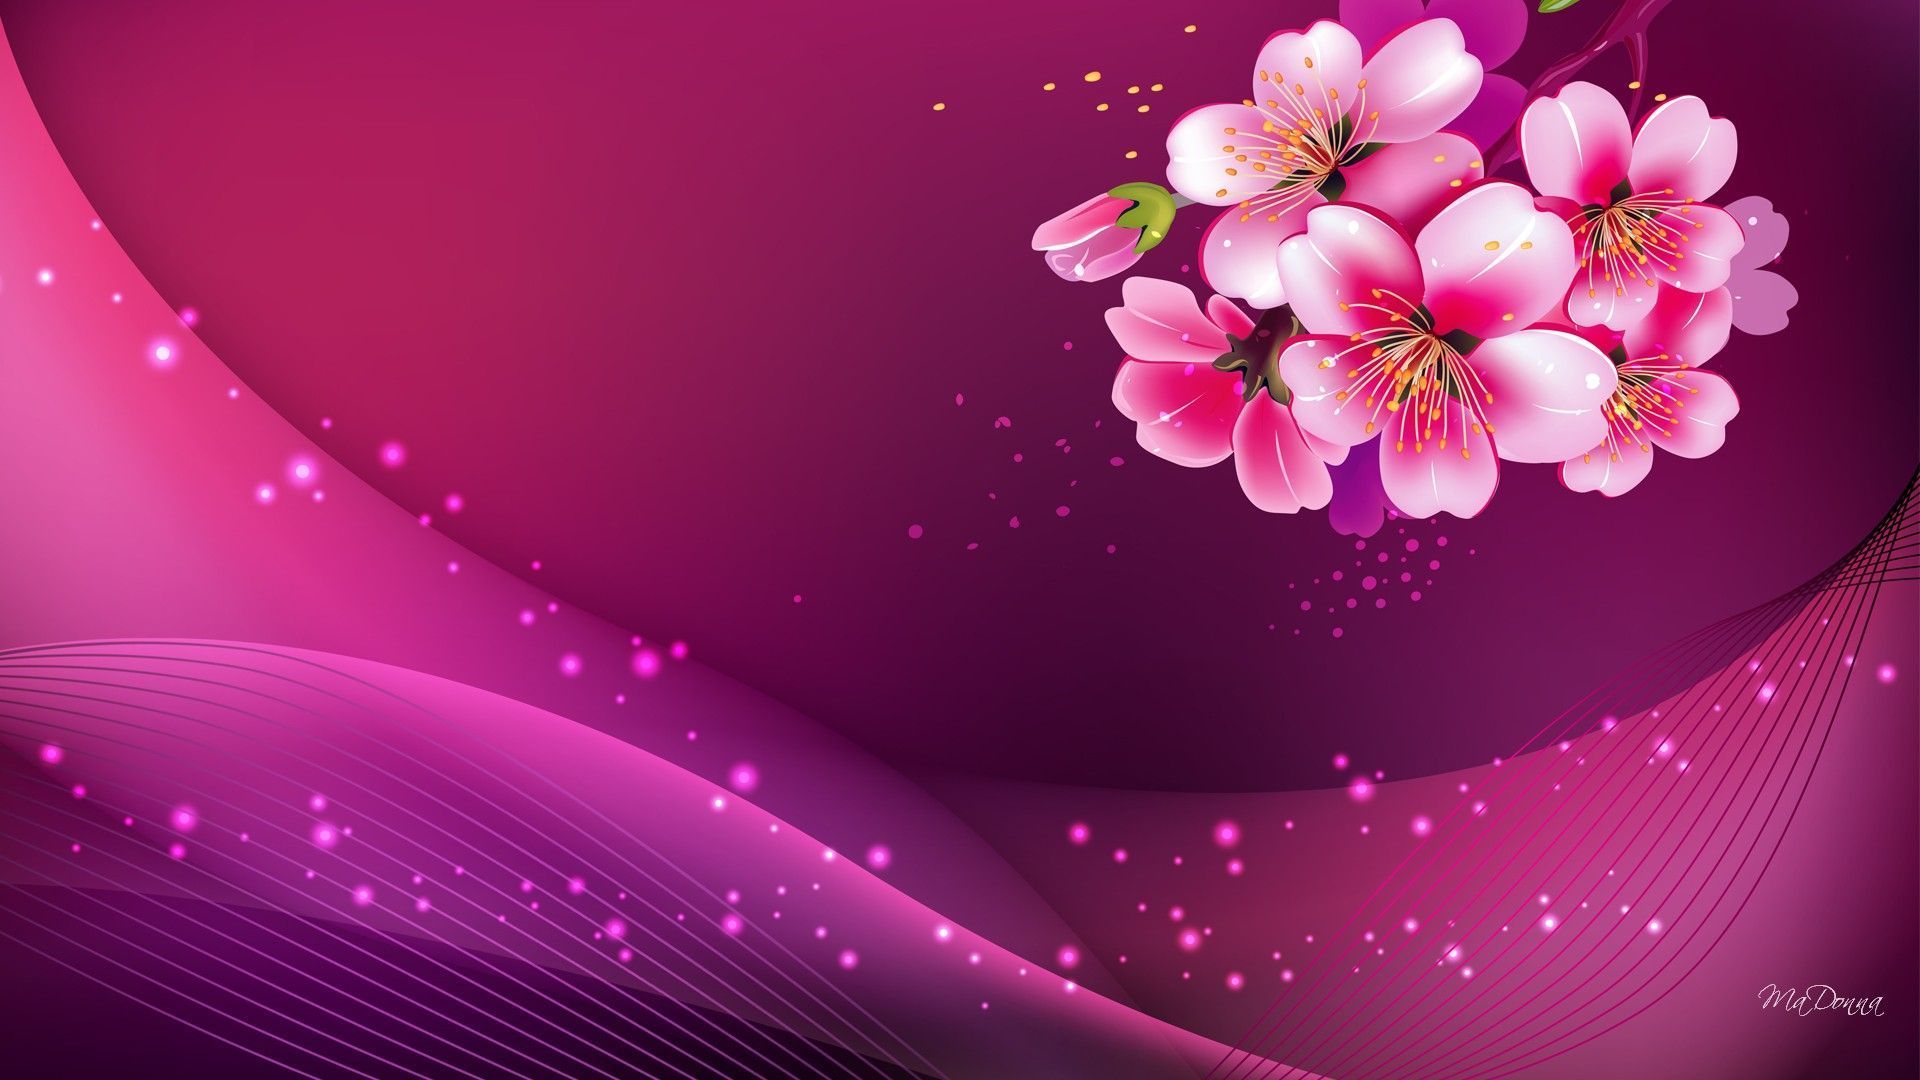 HD Pink Backgrounds